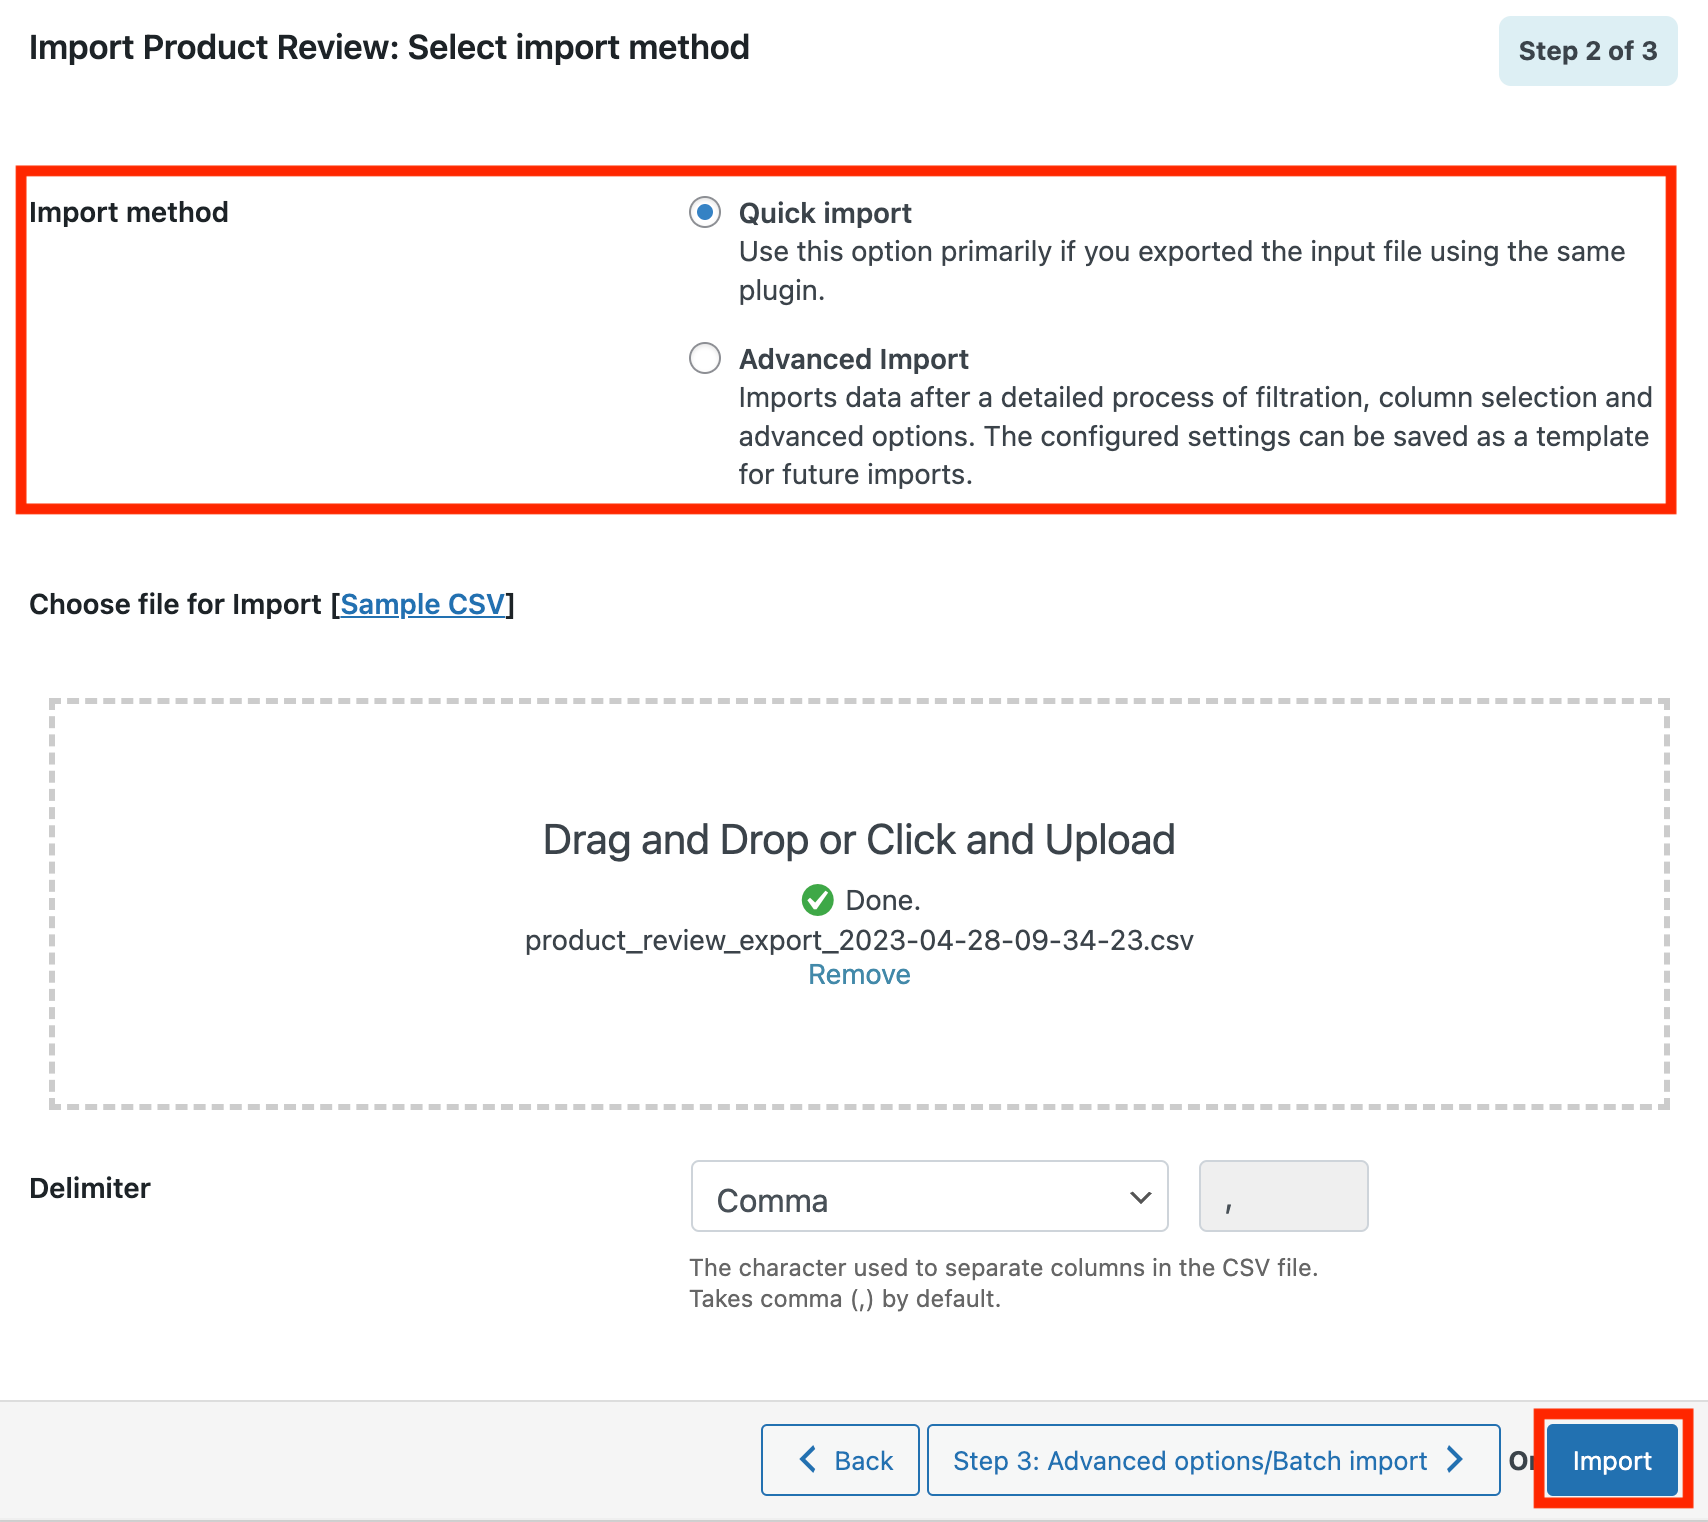 Upload product review CSV file